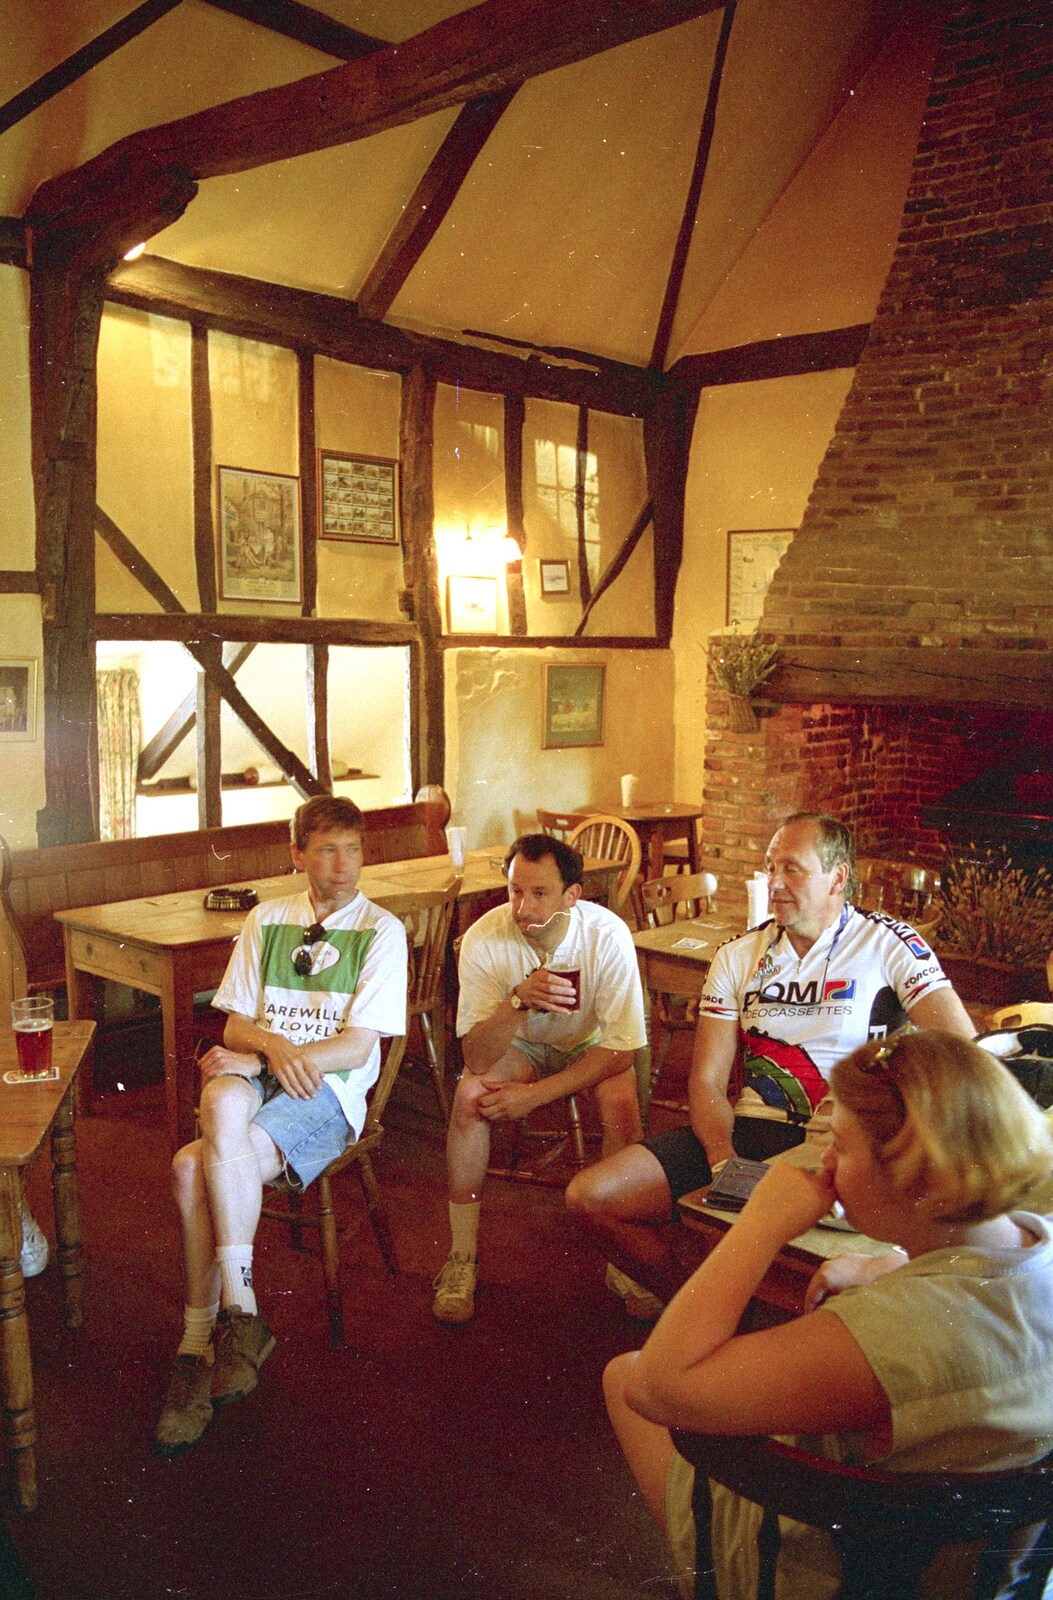 More hanging out at the Bramford Queen from The First BSCC Bike Ride to Southwold, Suffolk - 10th June 1996